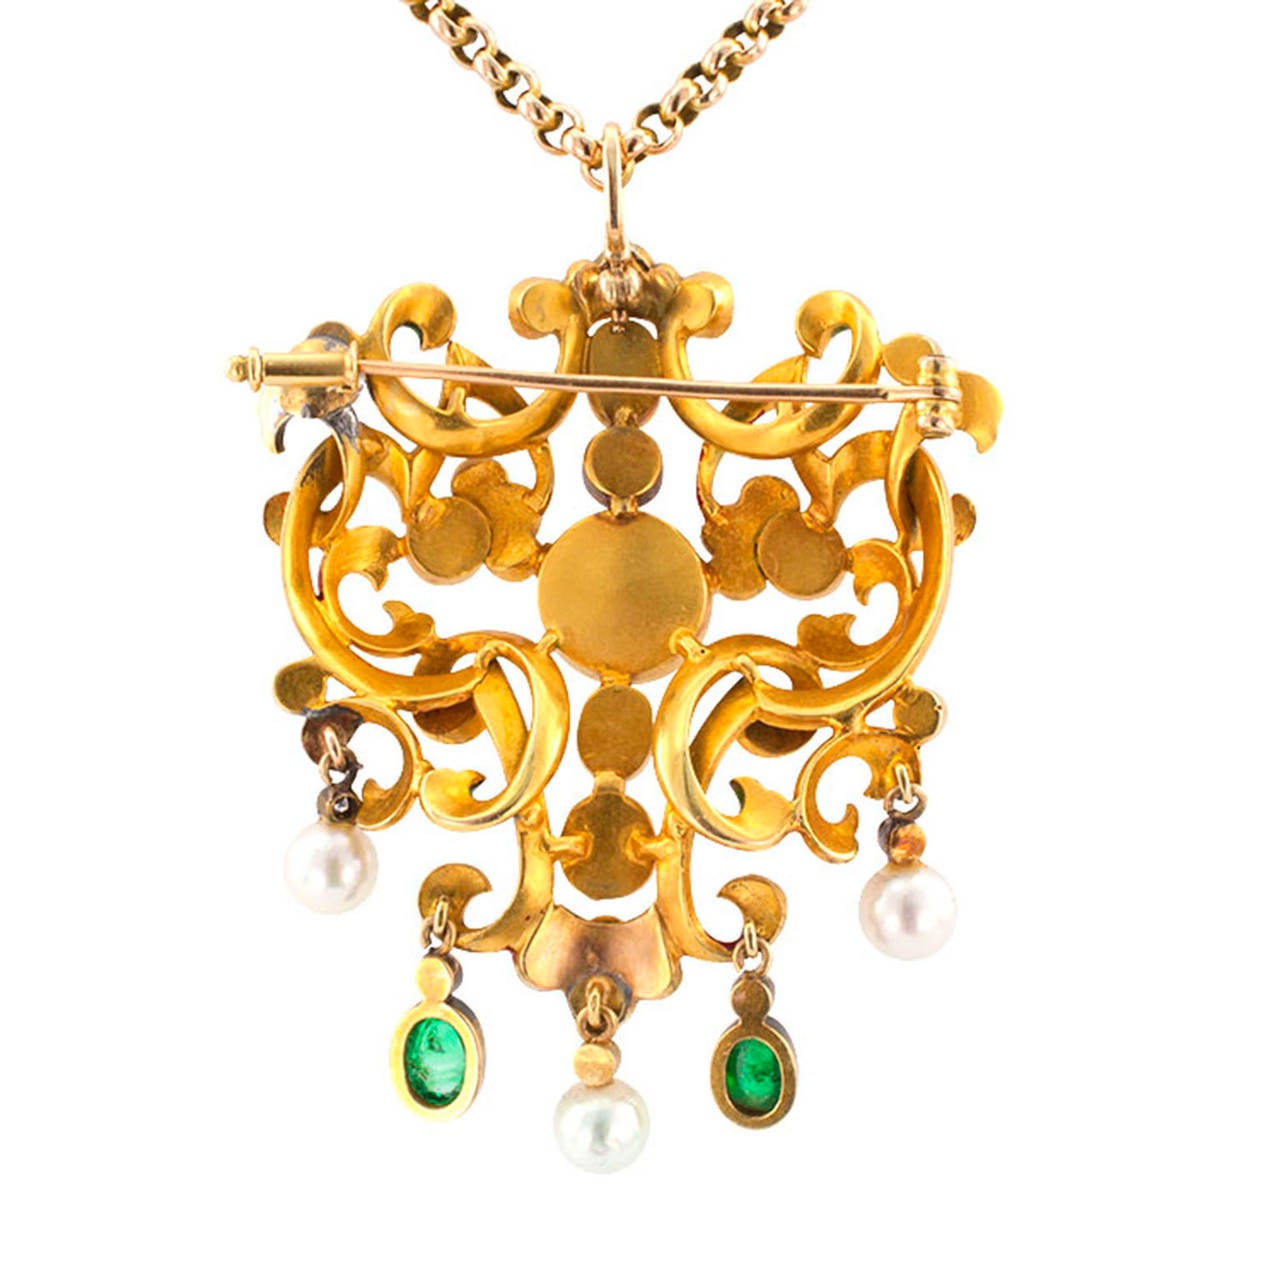 Circa 1890, bordering on the realm of dreams, a kaleidoscope of luminous gems, sparkling diamonds and brightly colored enamel, the open work design centers upon an old blister pearl within a network of interlaced ribbon motifs applied with bright